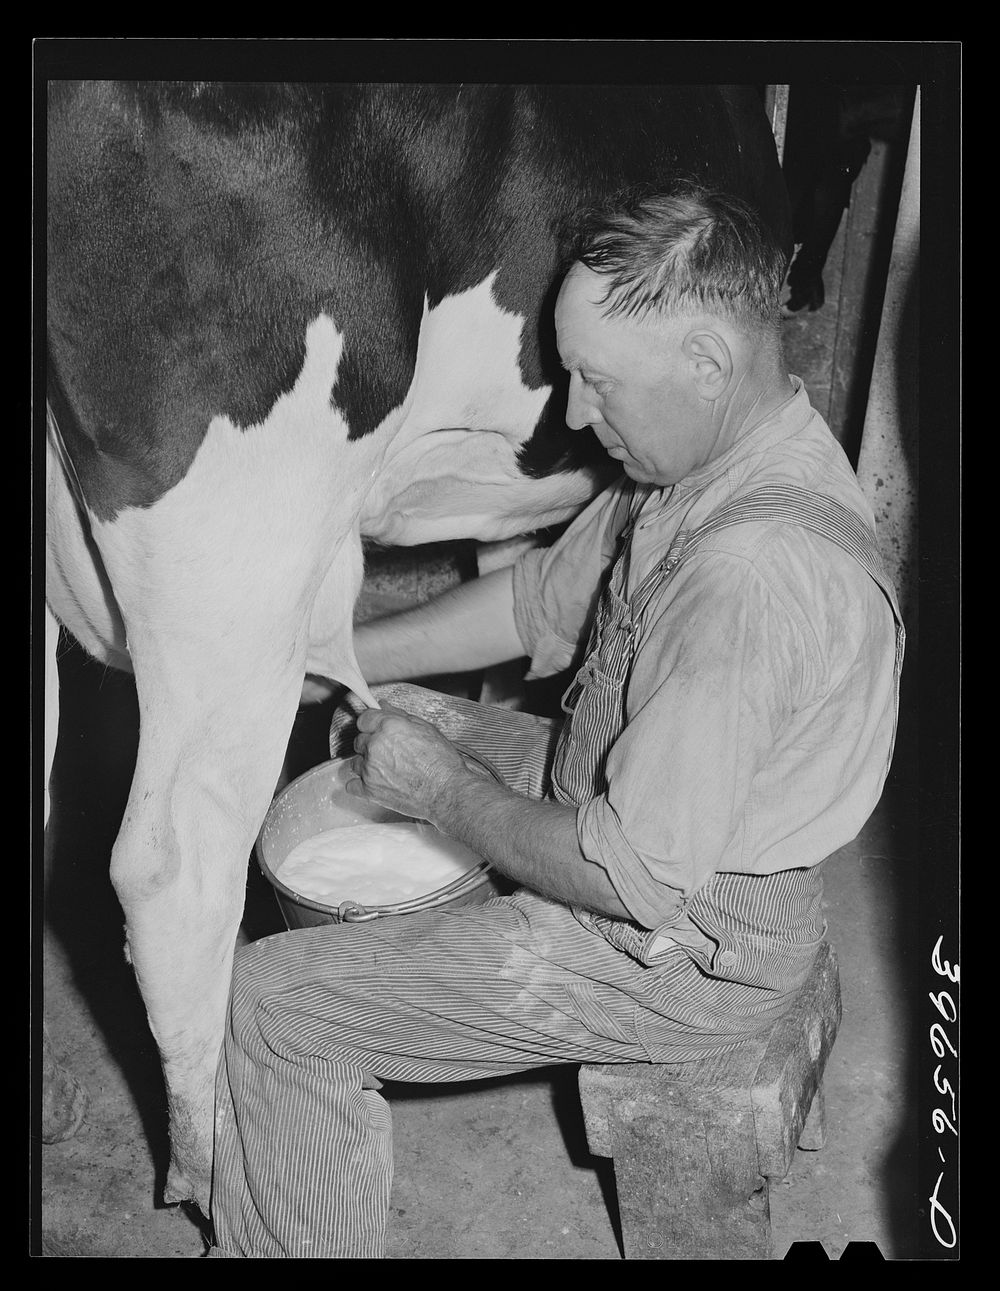 Member of the Dairymen's Cooperative Creamery milking. Caldwell, Canyon County, Idaho. Two million dollars has been paid…